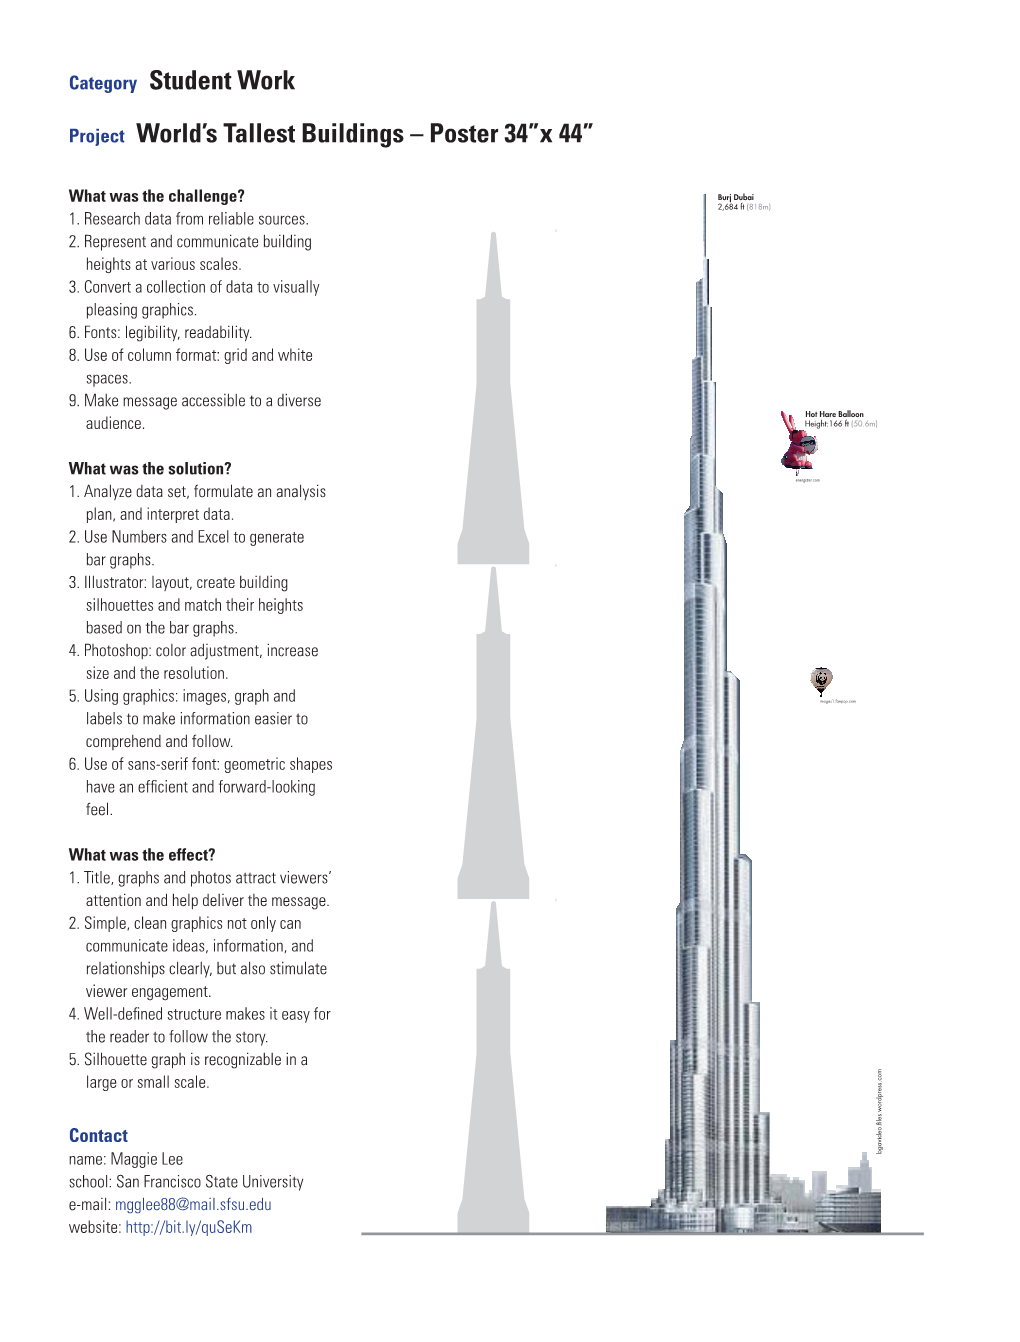 Category Student Work Project World's Tallest Buildings – Poster